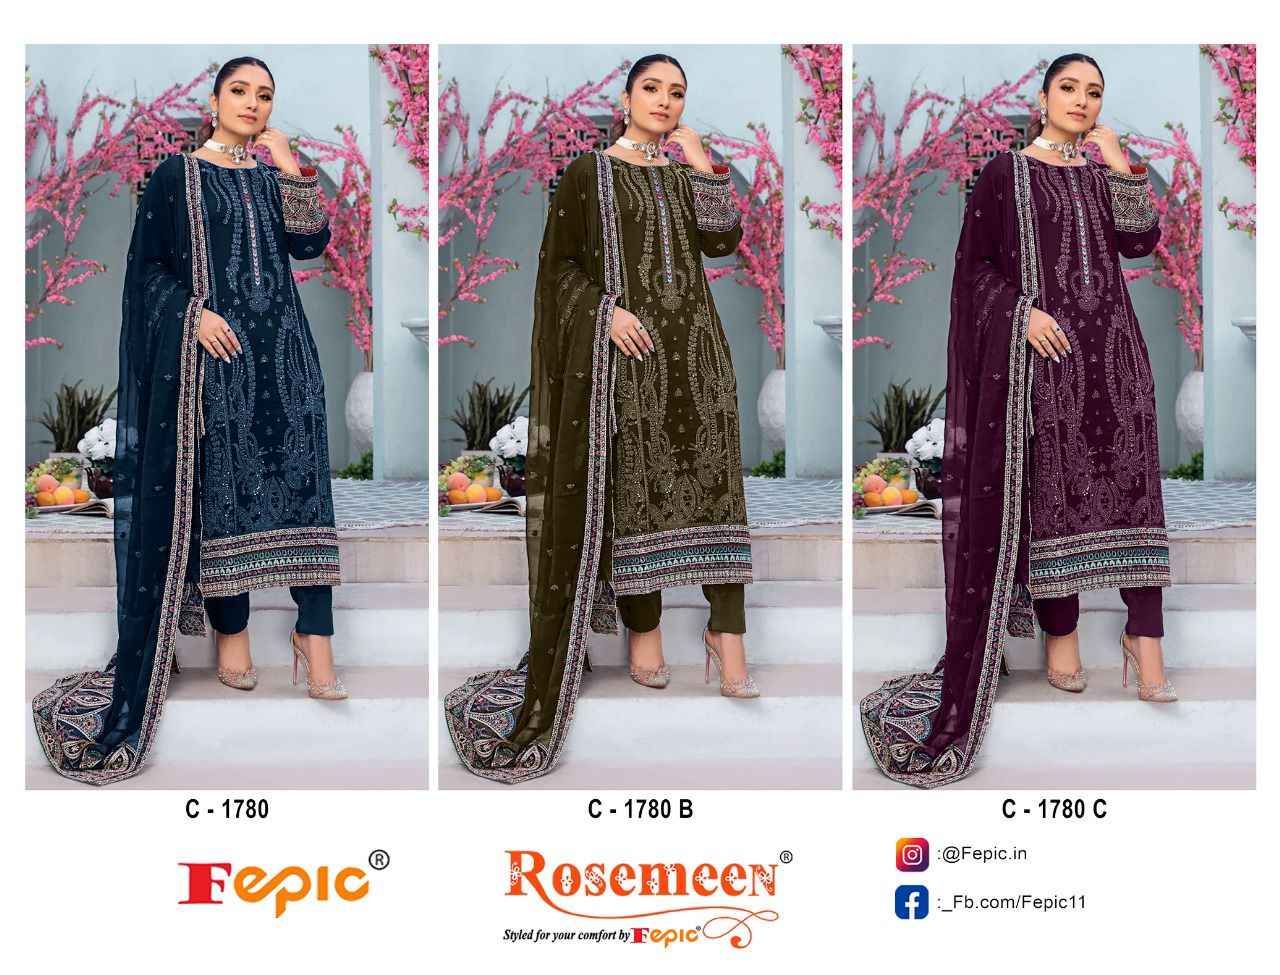 Fepic Rosemeen C-1780 Georgette Embroidered Dress Material (3 Pc Catalog)